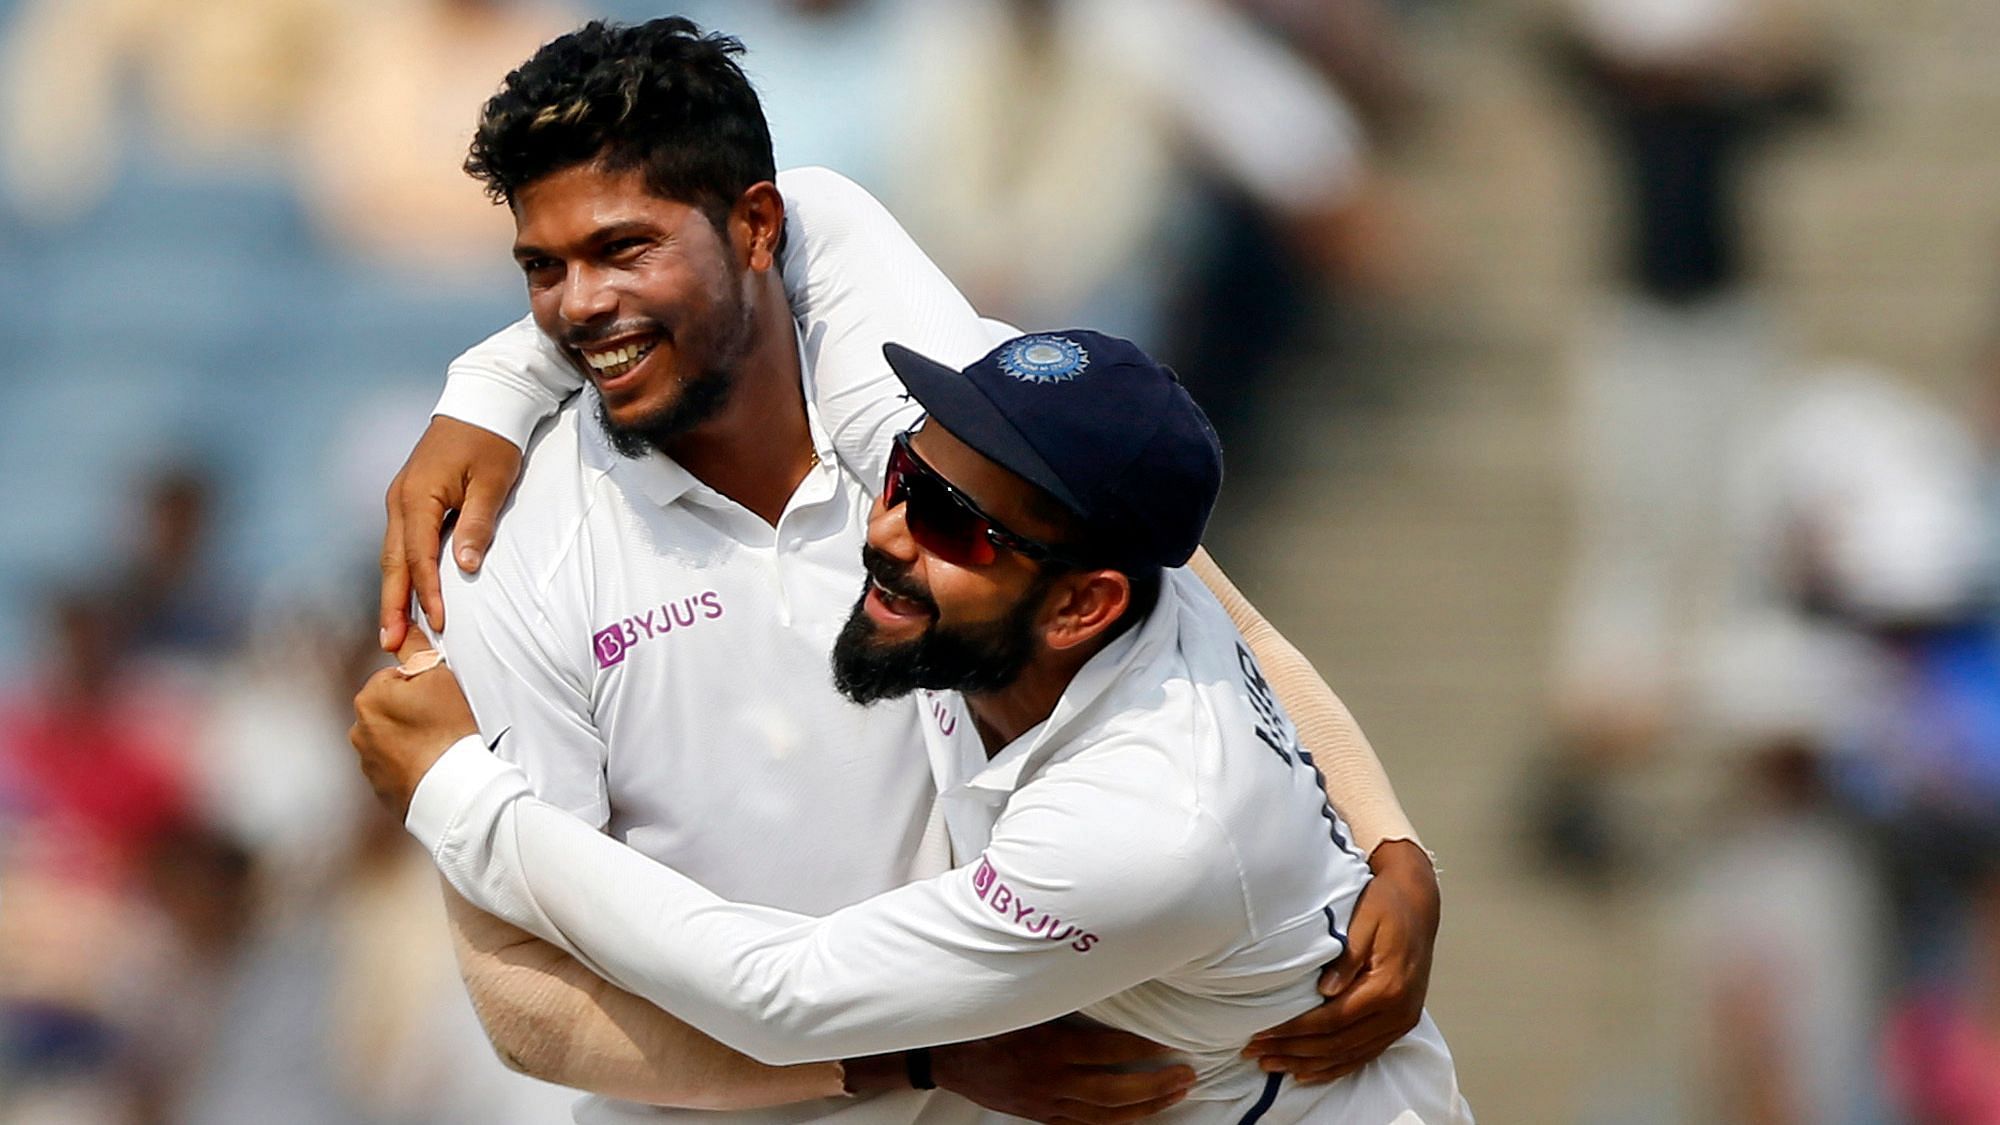 India were banking on their seamers, and Umesh Yadav and Ishant Sharma justified the call.